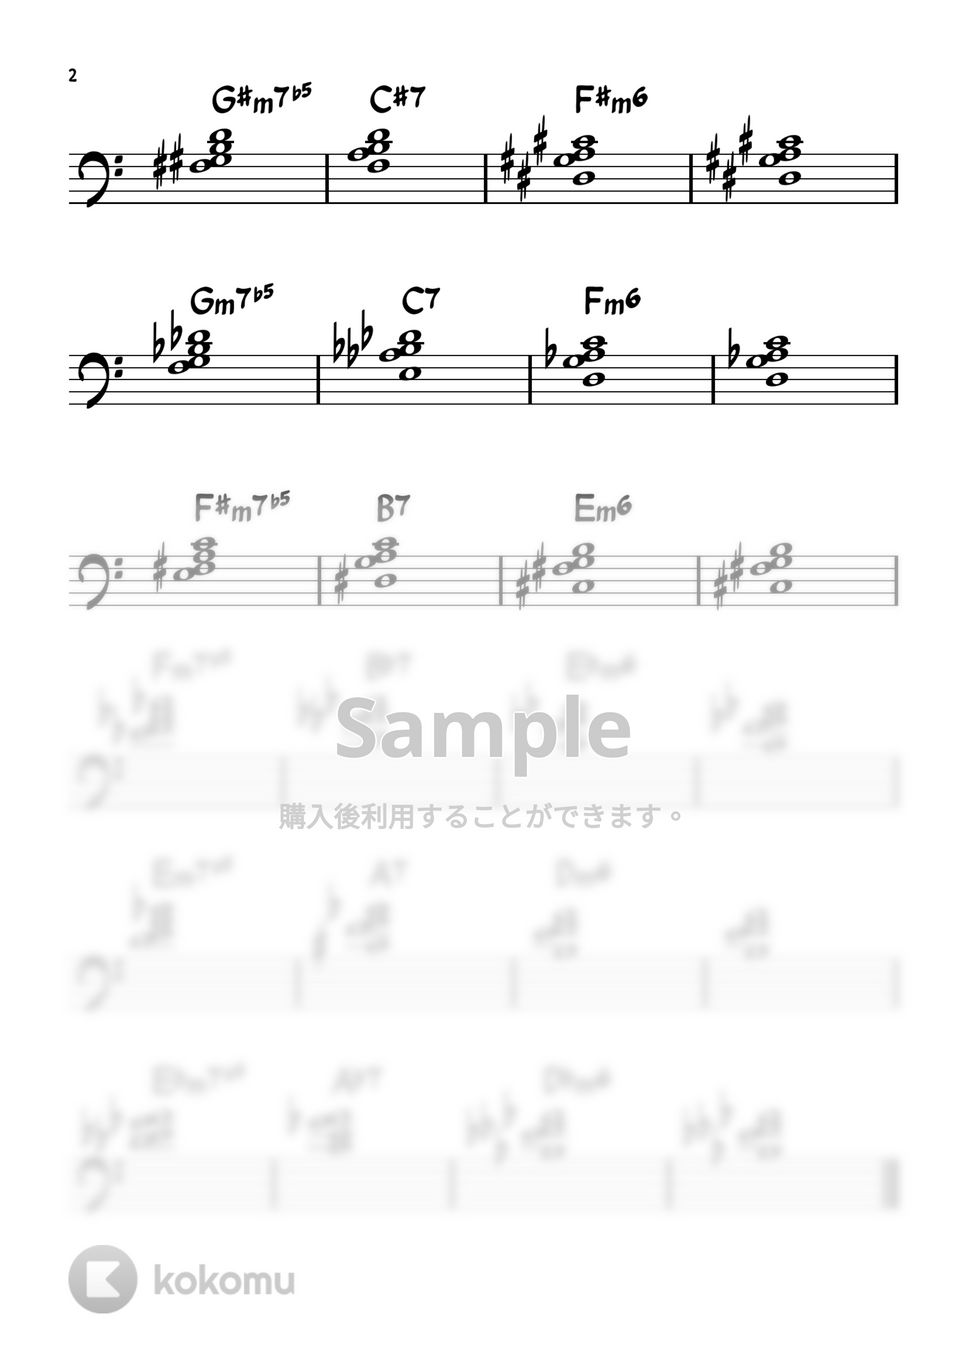 shimarinmarket - minor 2-5-1② 7135half tone↓exercise (for the left hand practice)